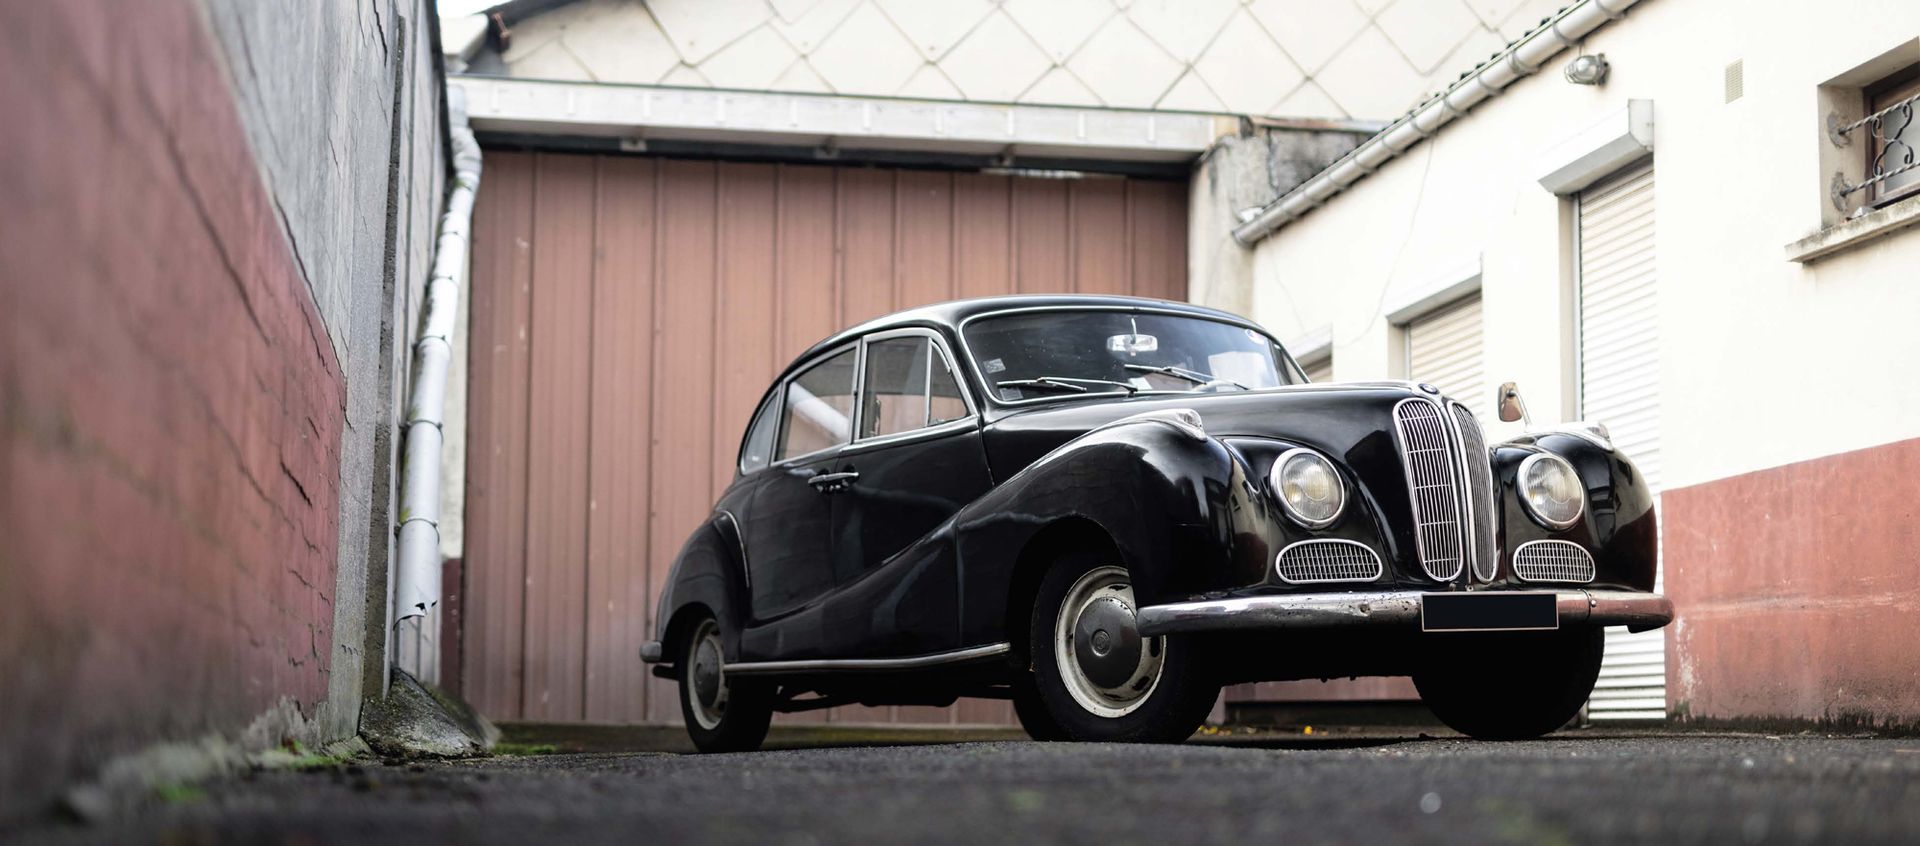 1958 BMW 501 série3 
Entirely original vehicle

In the same hands for 37 years

&hellip;